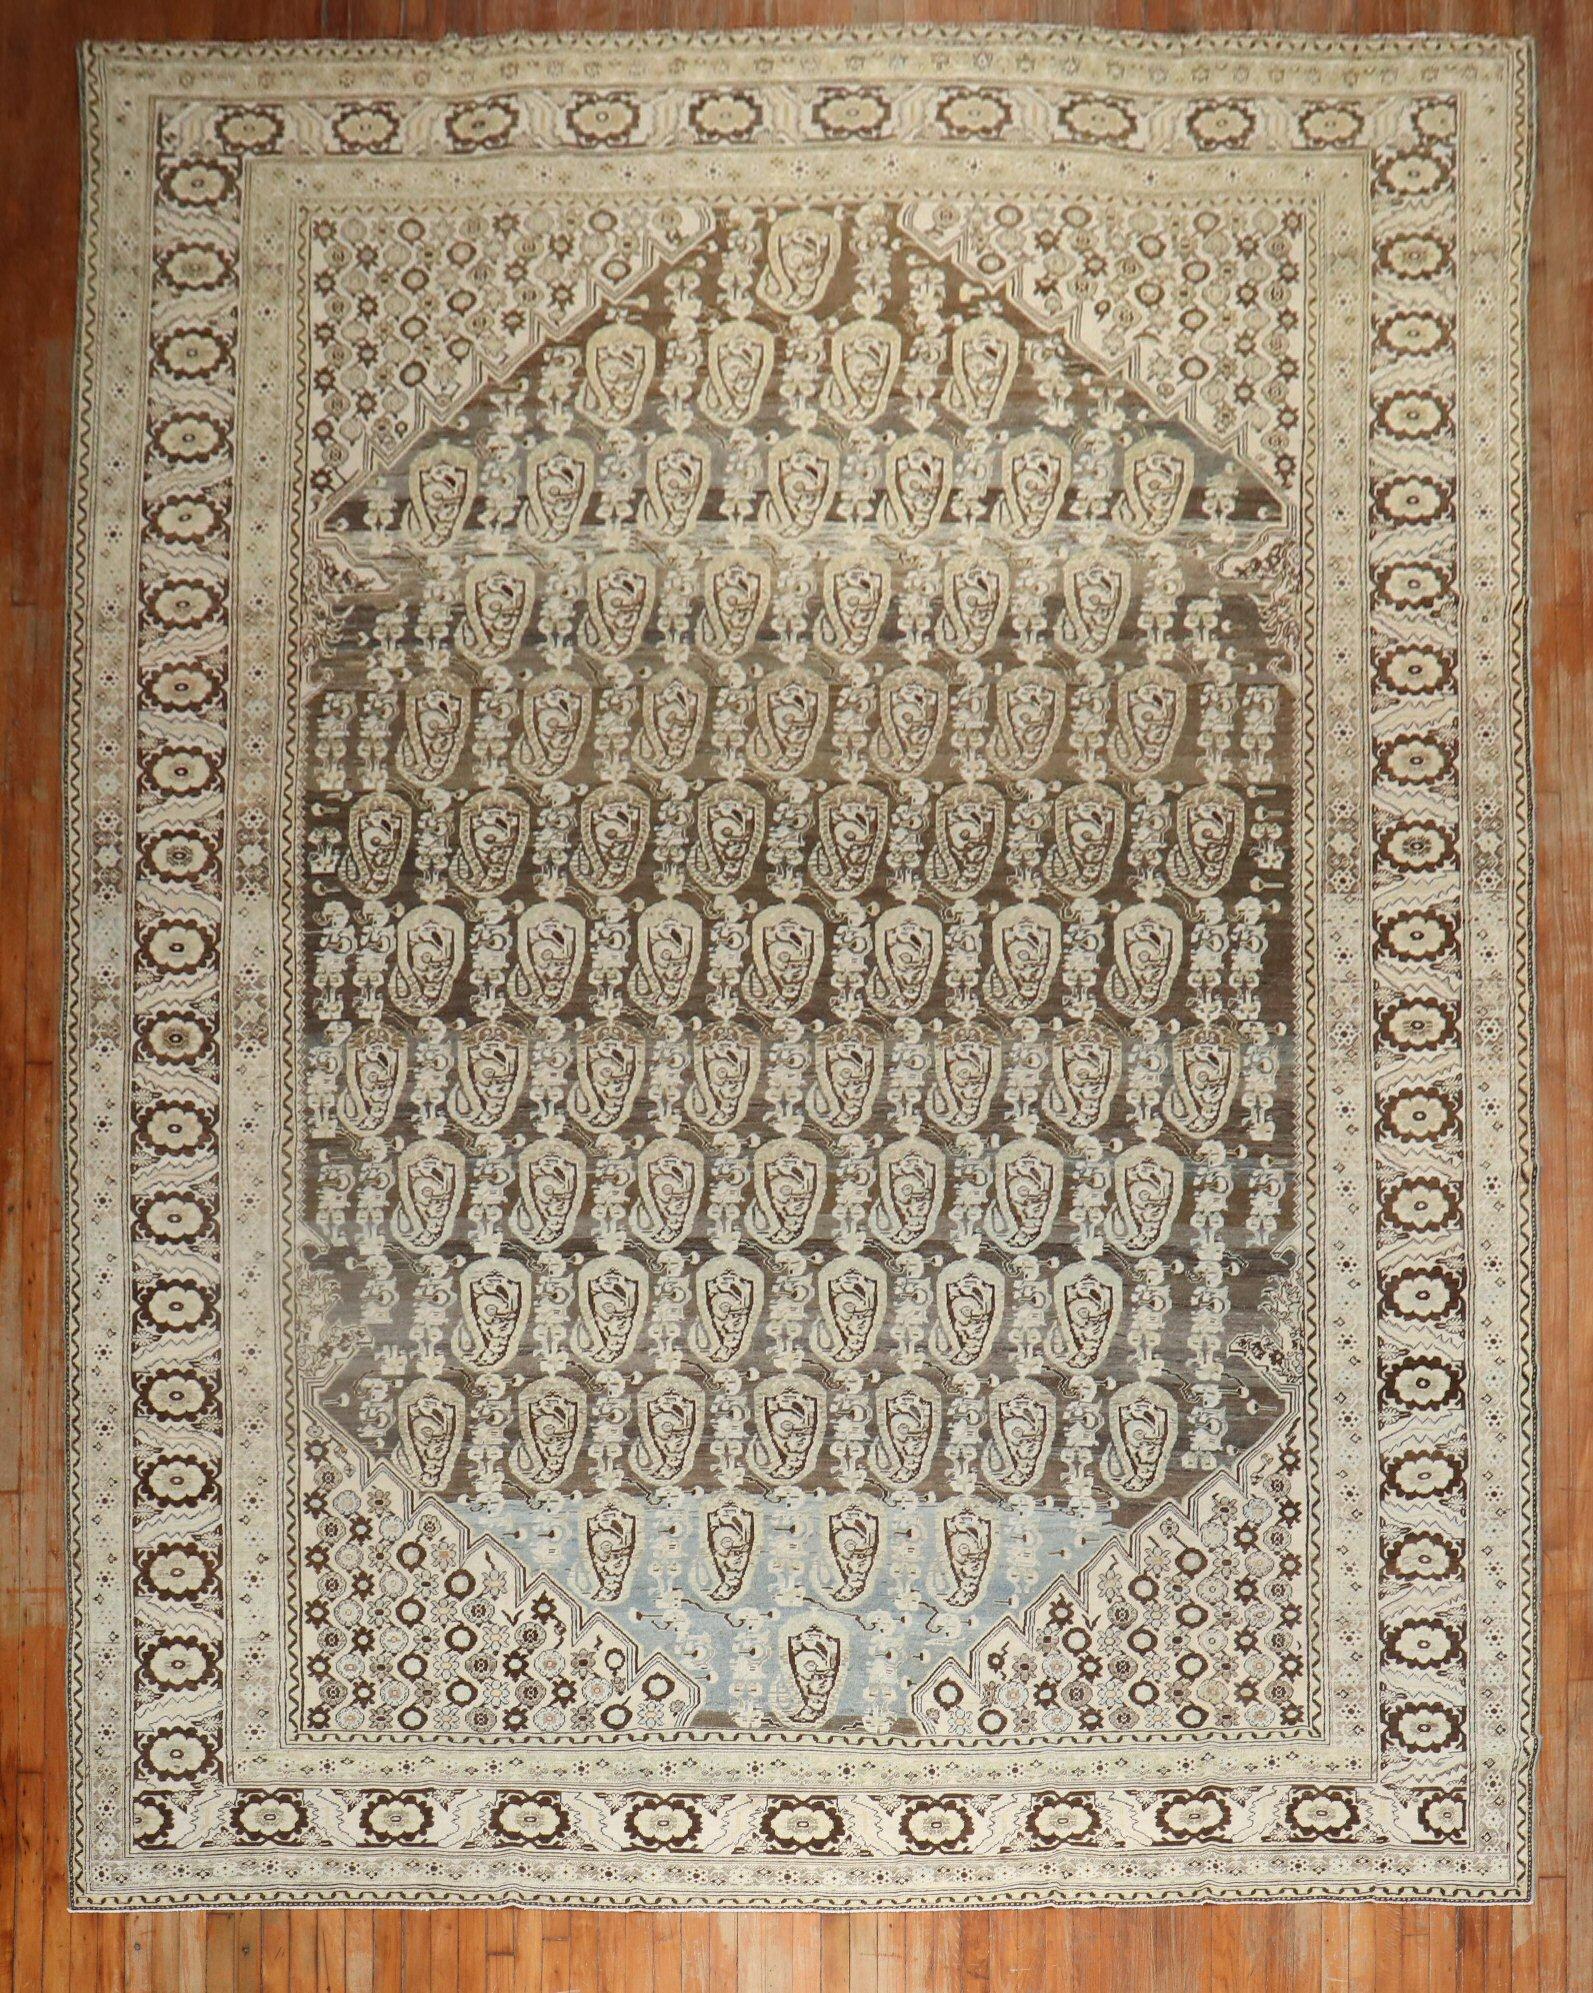 A large room size Antique Persian Malayer rug from the early 20th Century

Measure: 10'3'' x 16'2.

